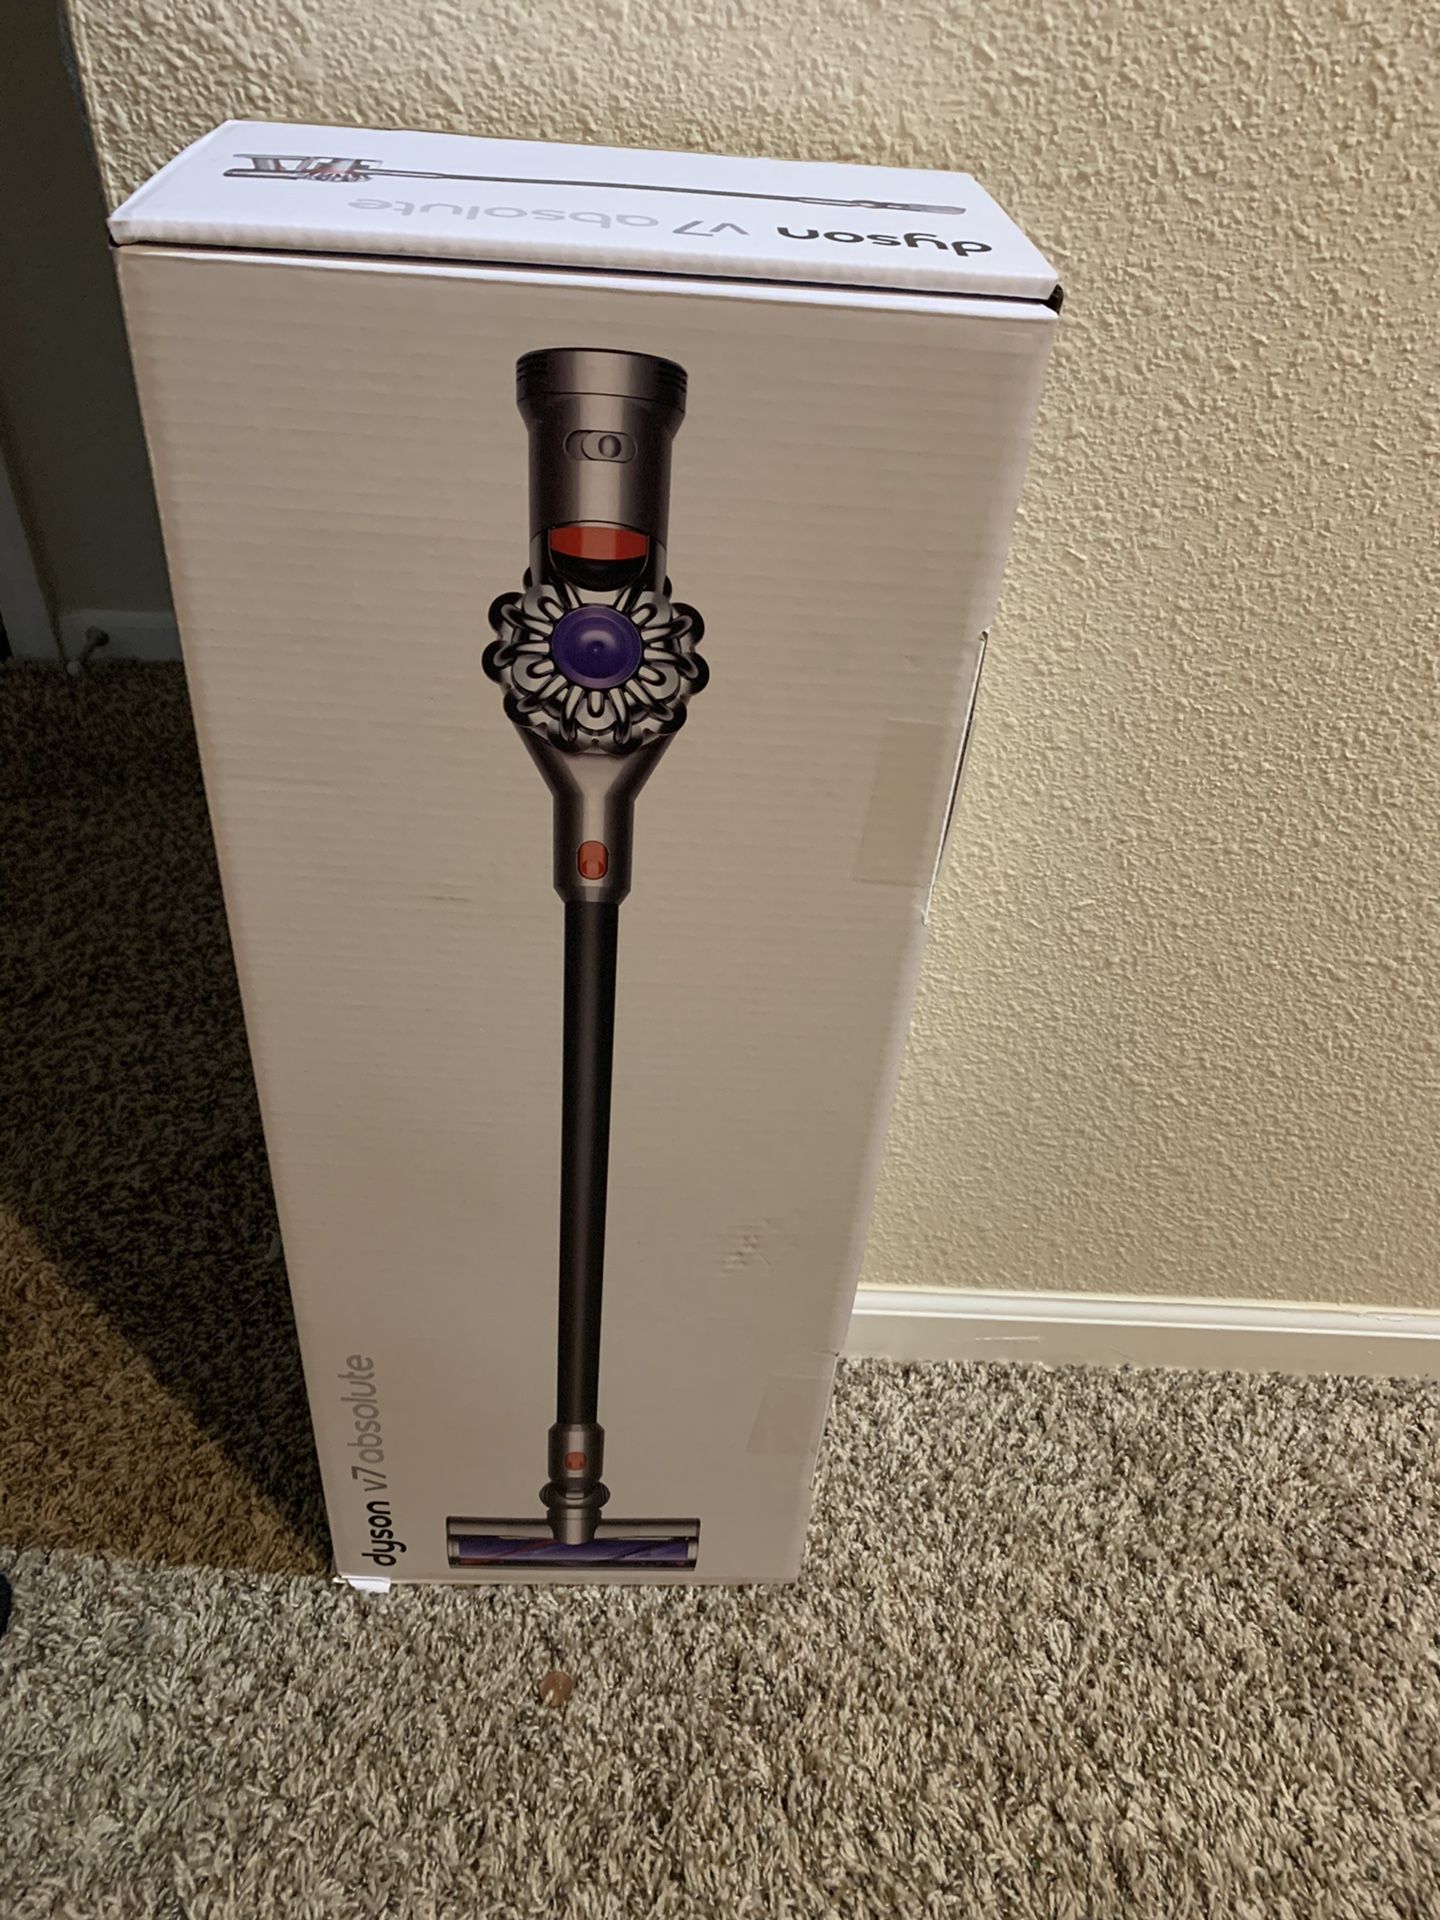 *brand new* *unopened* Dyson V7 Absolute with included in warranty and all attachments. Available to ship for a small fee or pickup in downtown chicag